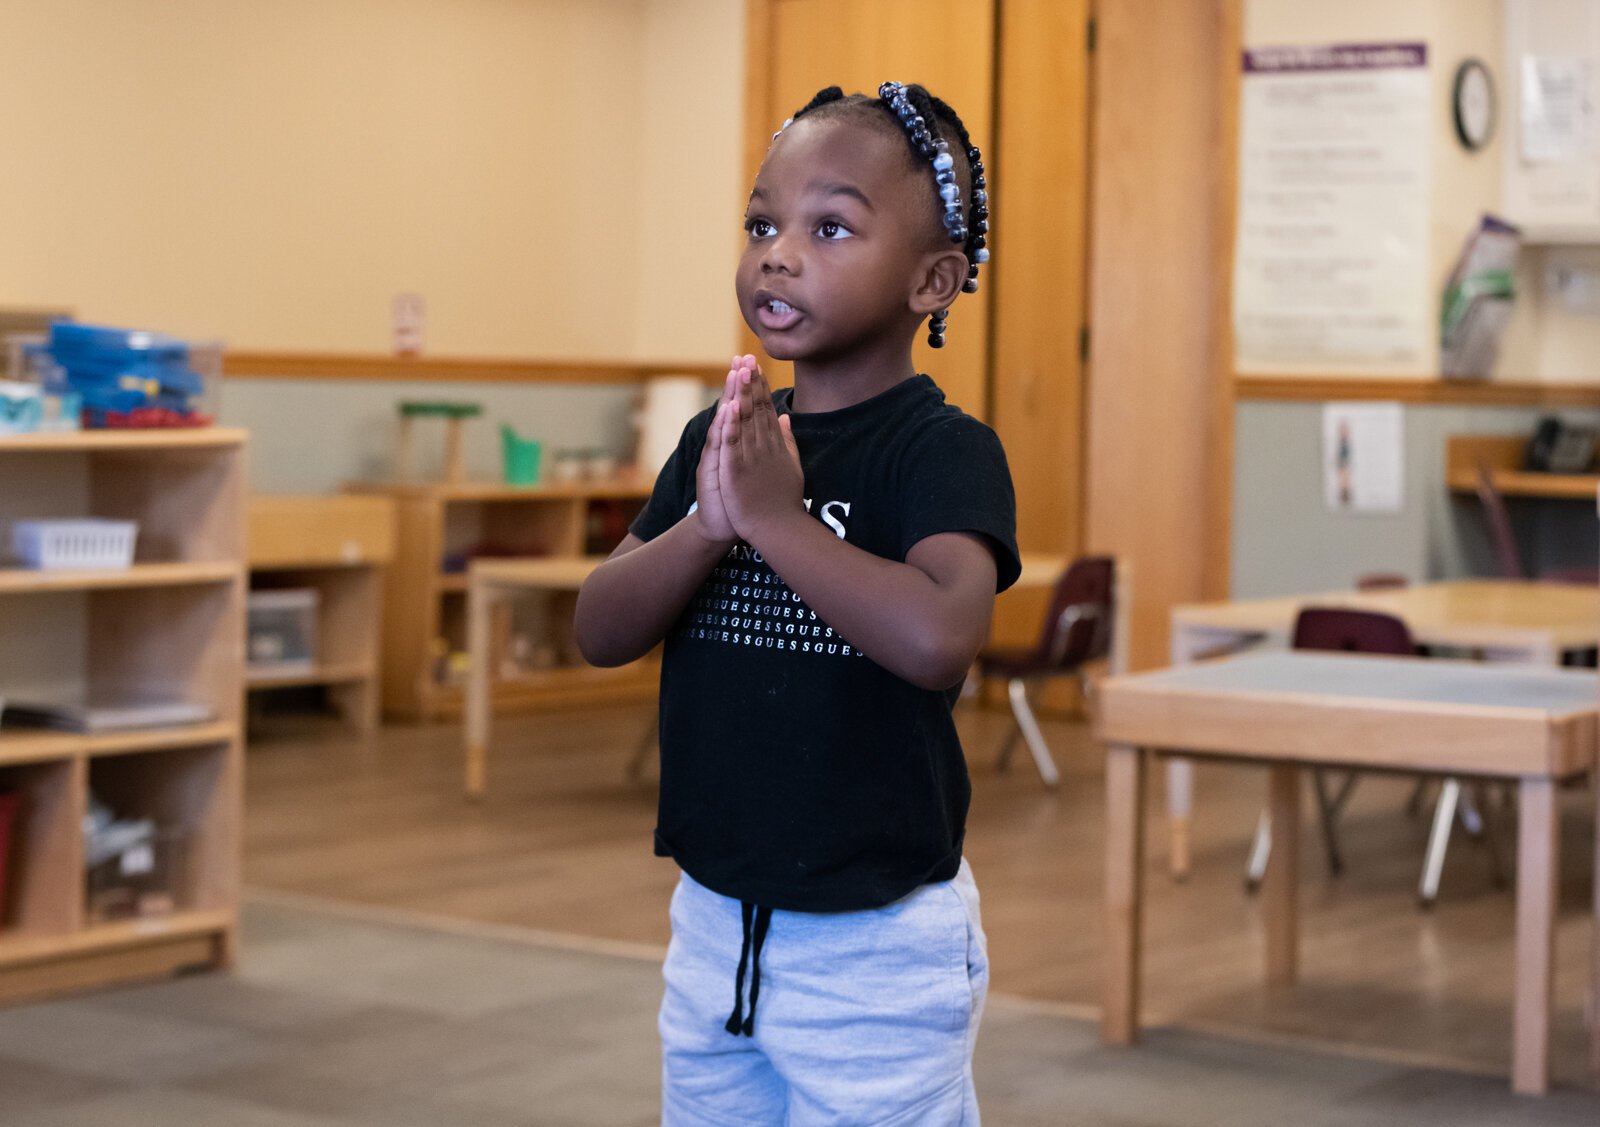 Student Lelan strikes a pose while stretching during Miss Nielson's 3-5 year old class at Children's Village, 6613 S. Anthony.